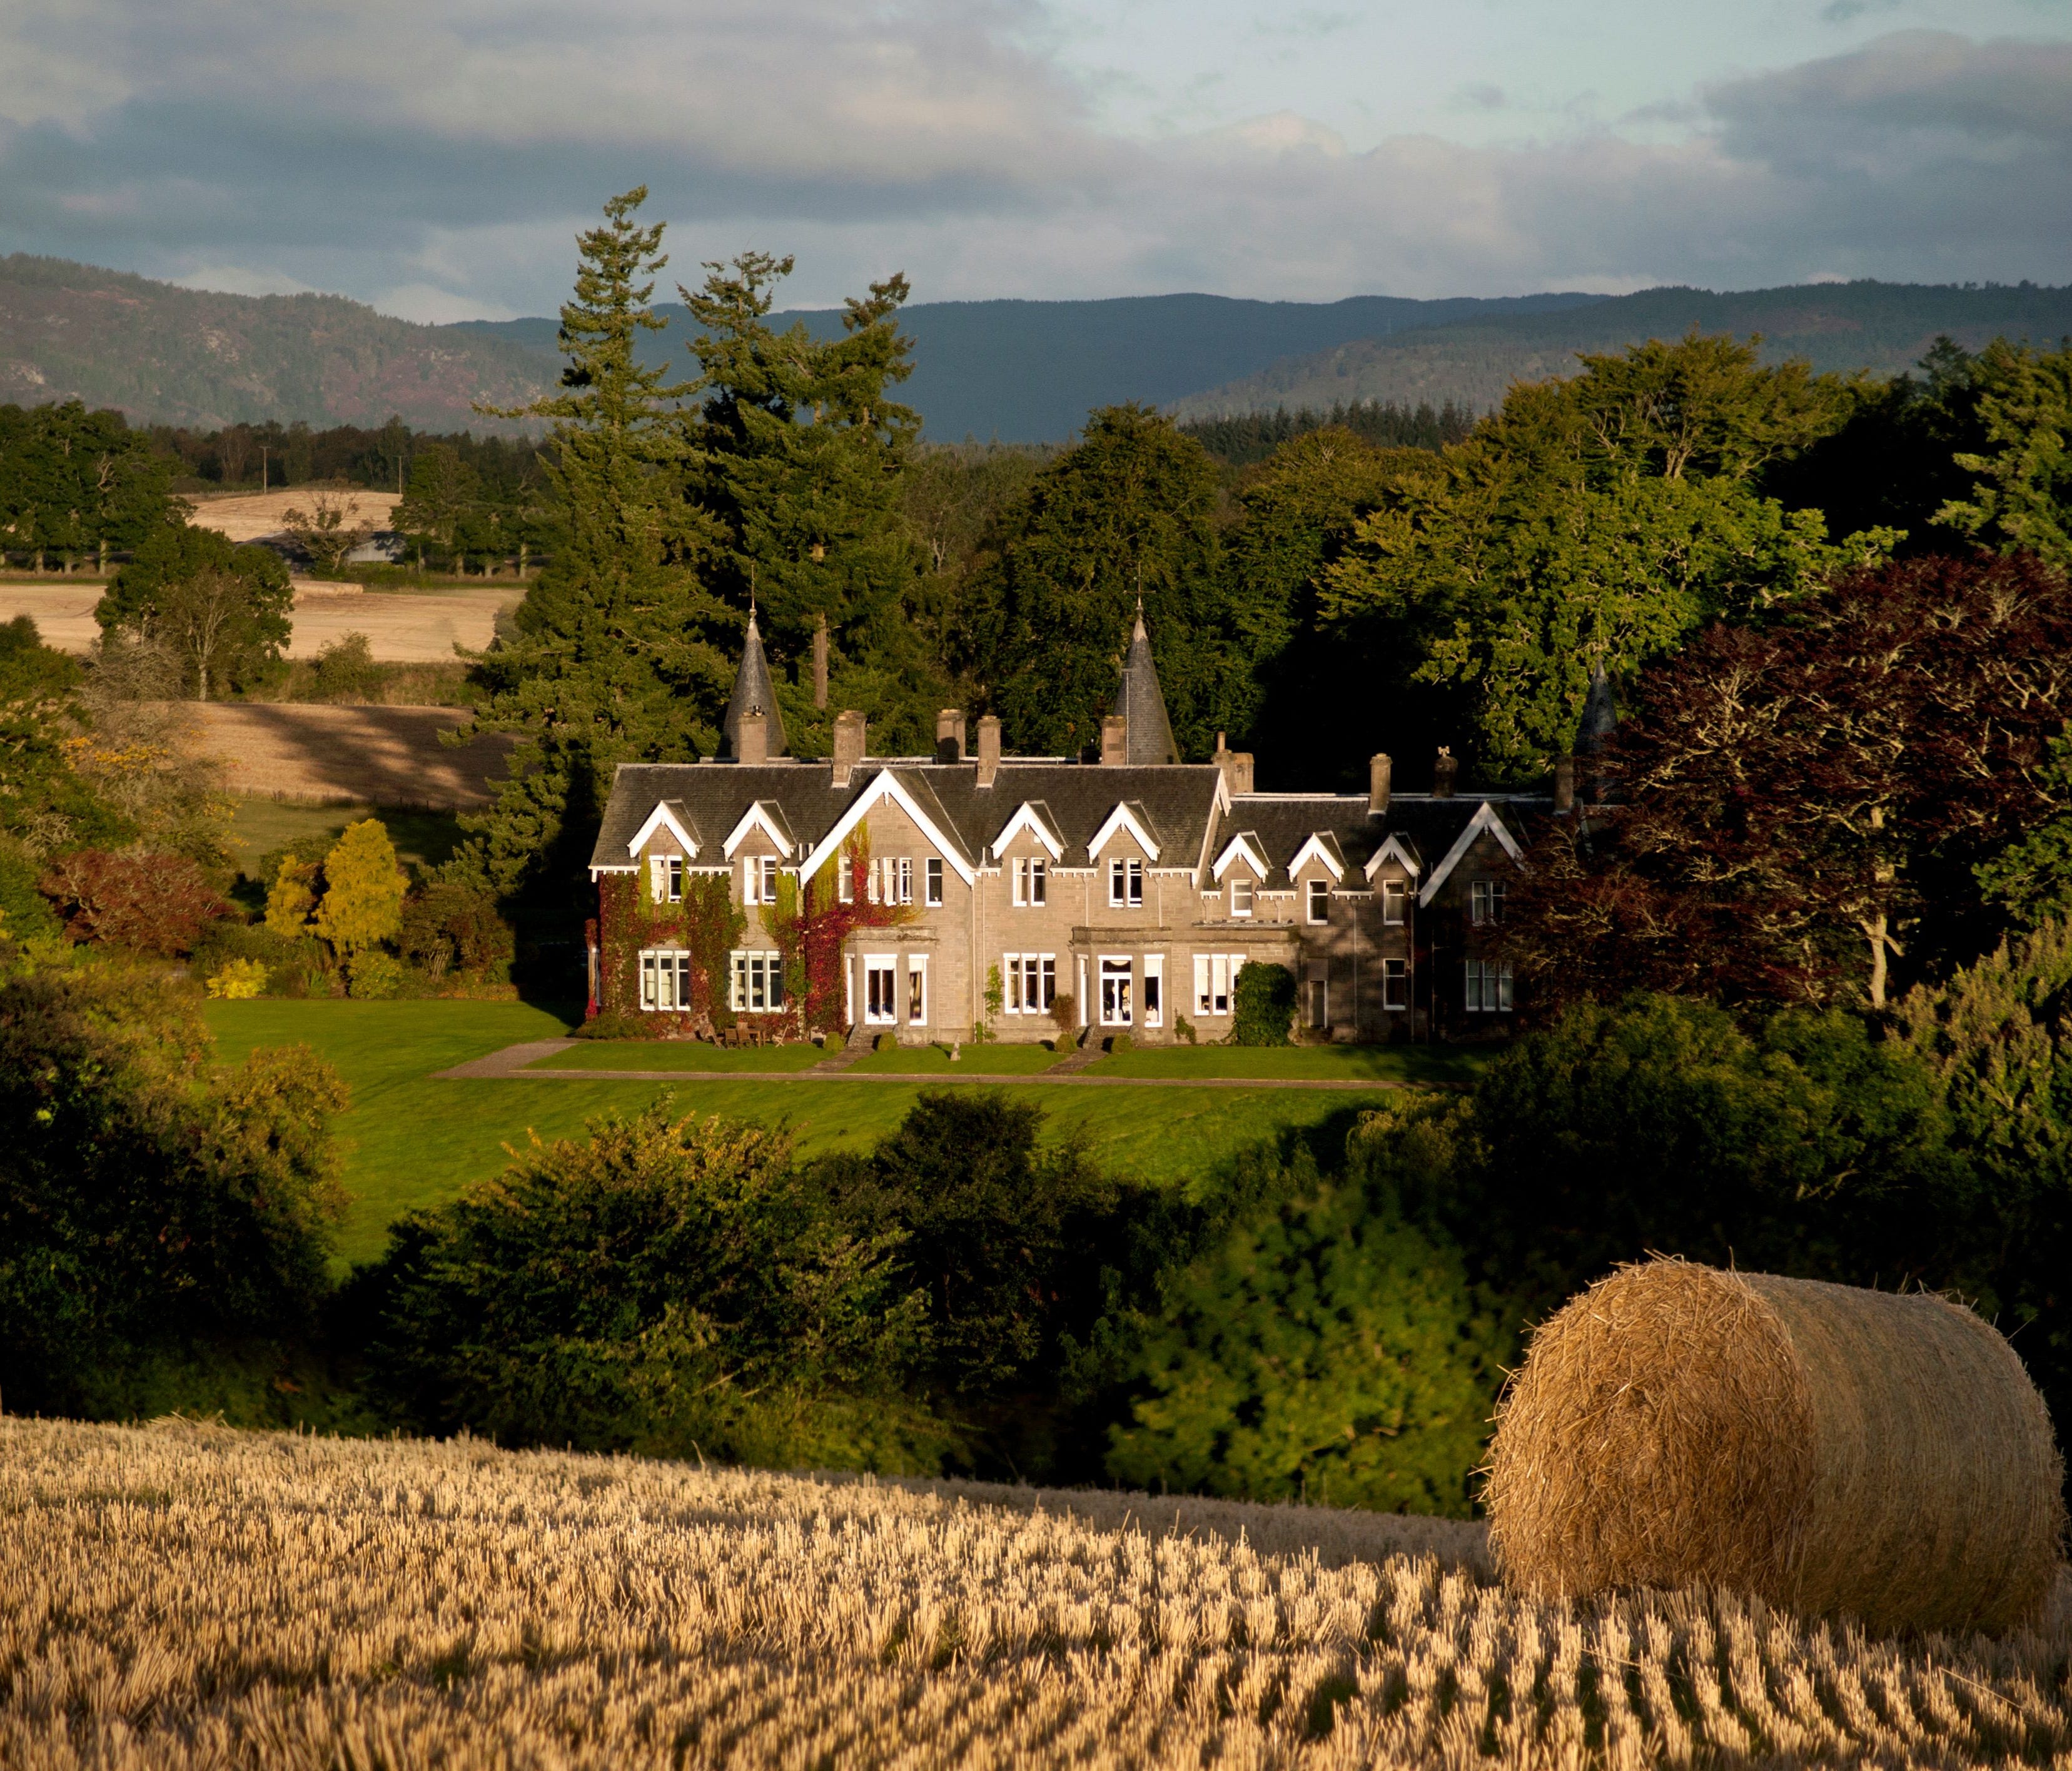 Ballathie House, Kinclaven, Perth and Kinross: Follow a long driveway to this Victorian country house on the banks of the River Tay, adorned with paintings in gilded frames and prize salmon in display cases. There's a wide choice of whiskies in the p